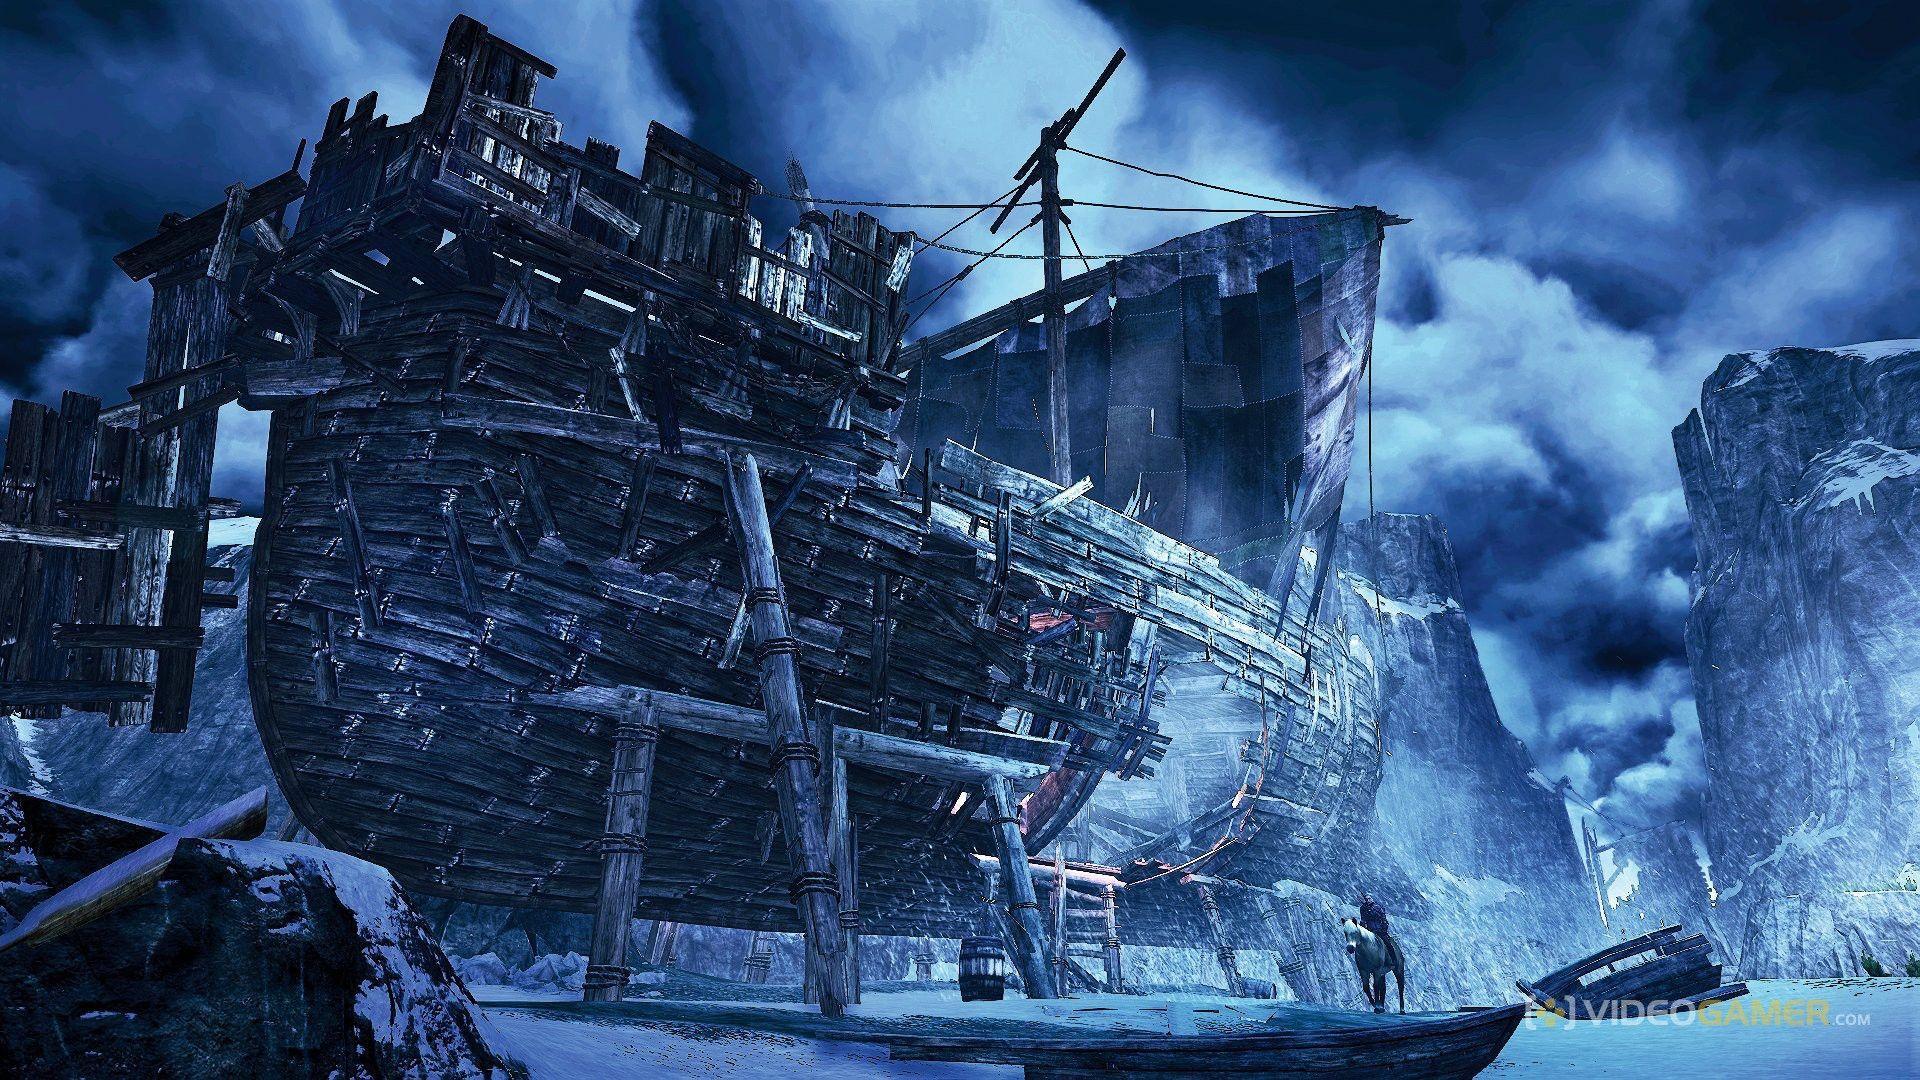 The Witcher 3: Wild Hunt: the old ship wallpaper and image